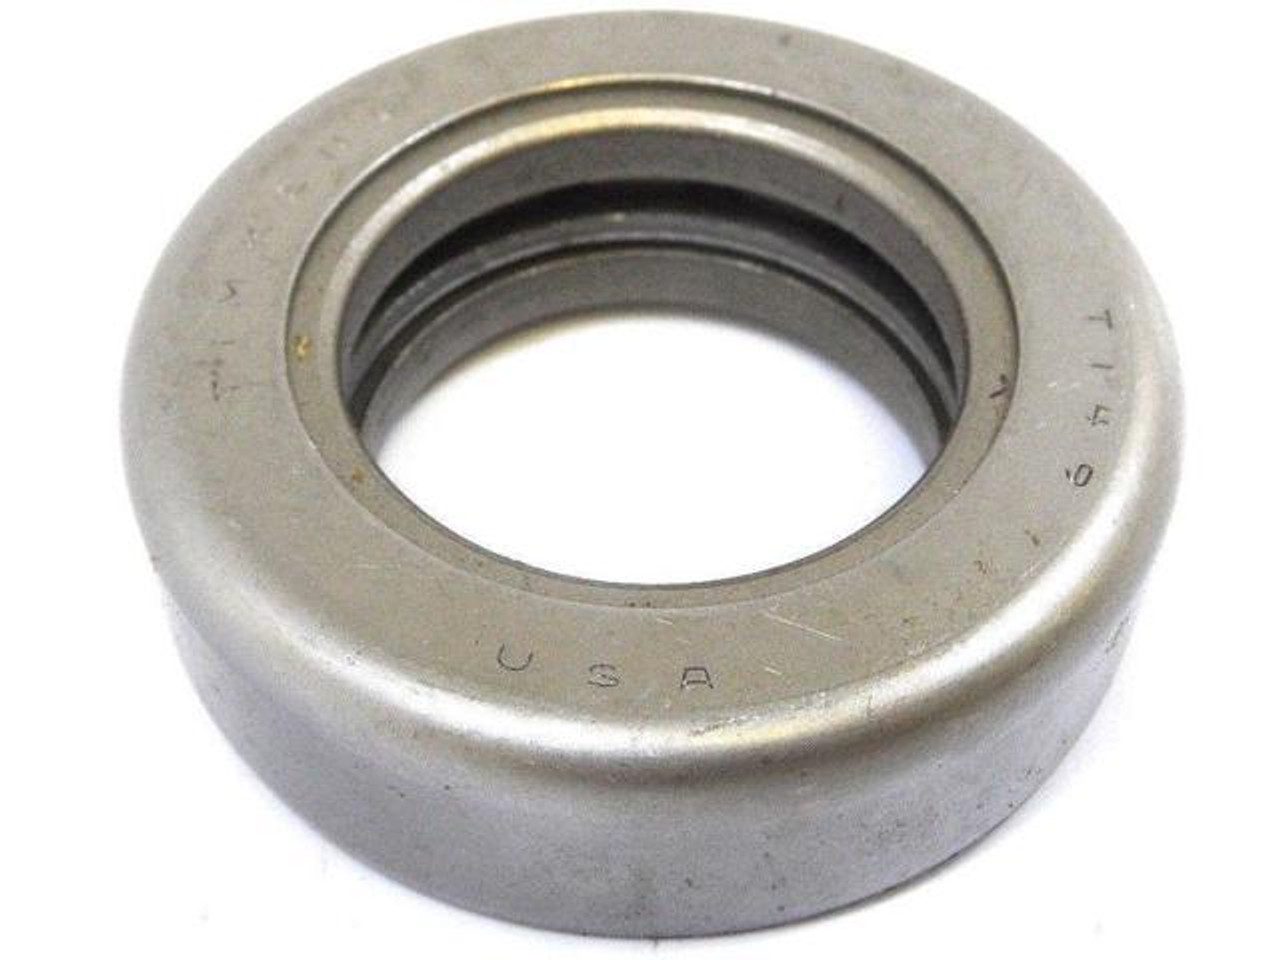 Timken® Stamped Race Thrust Bearing  T309-904A1